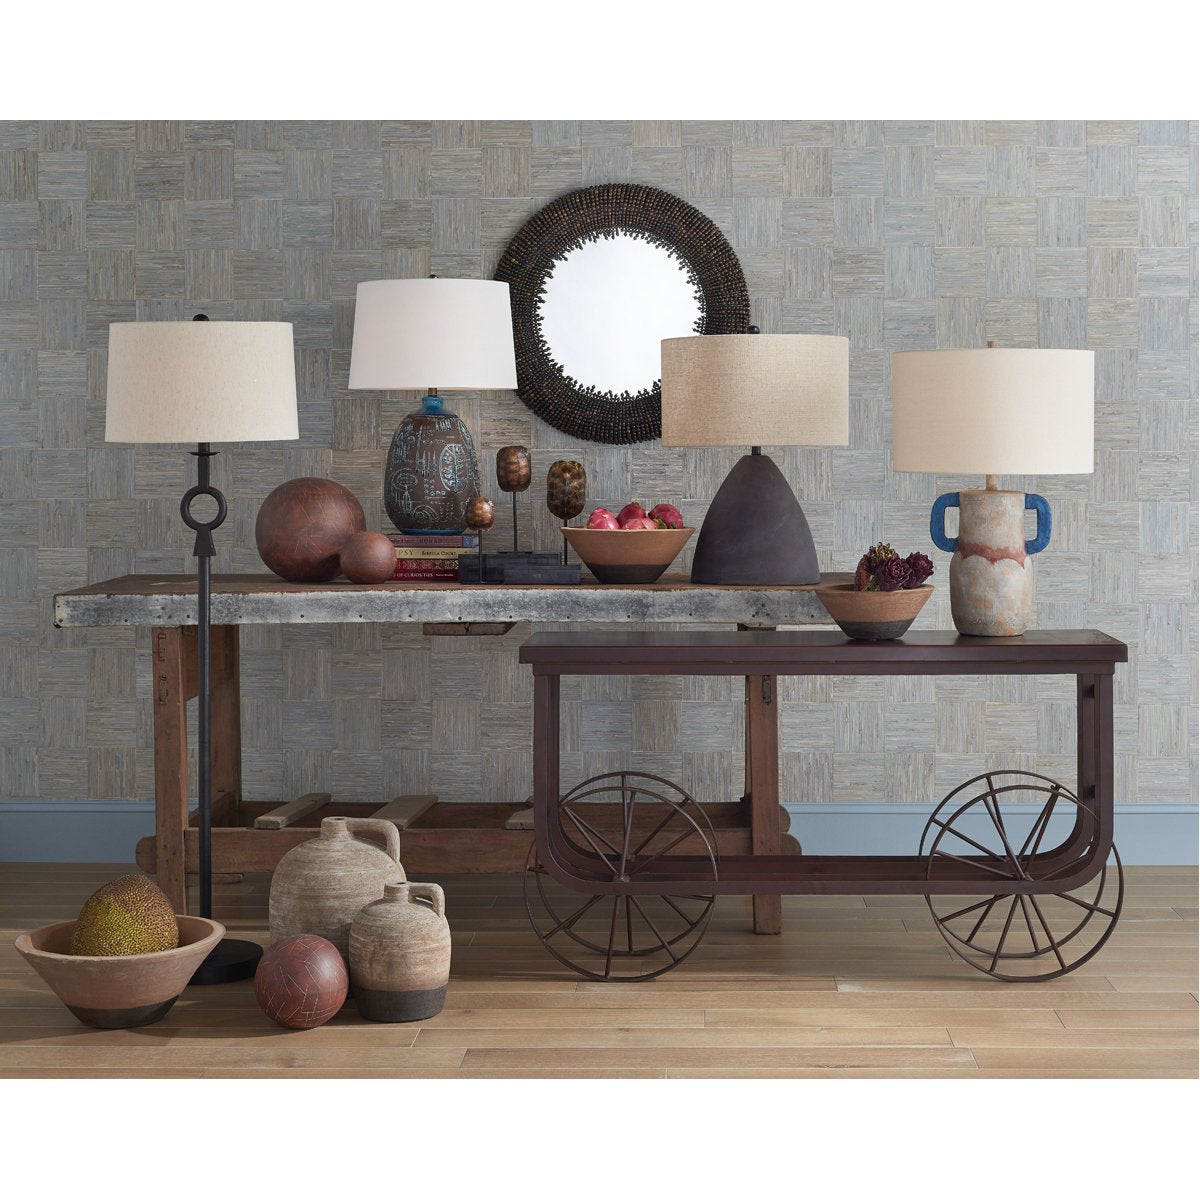 Currey and Company Zea Table Lamp